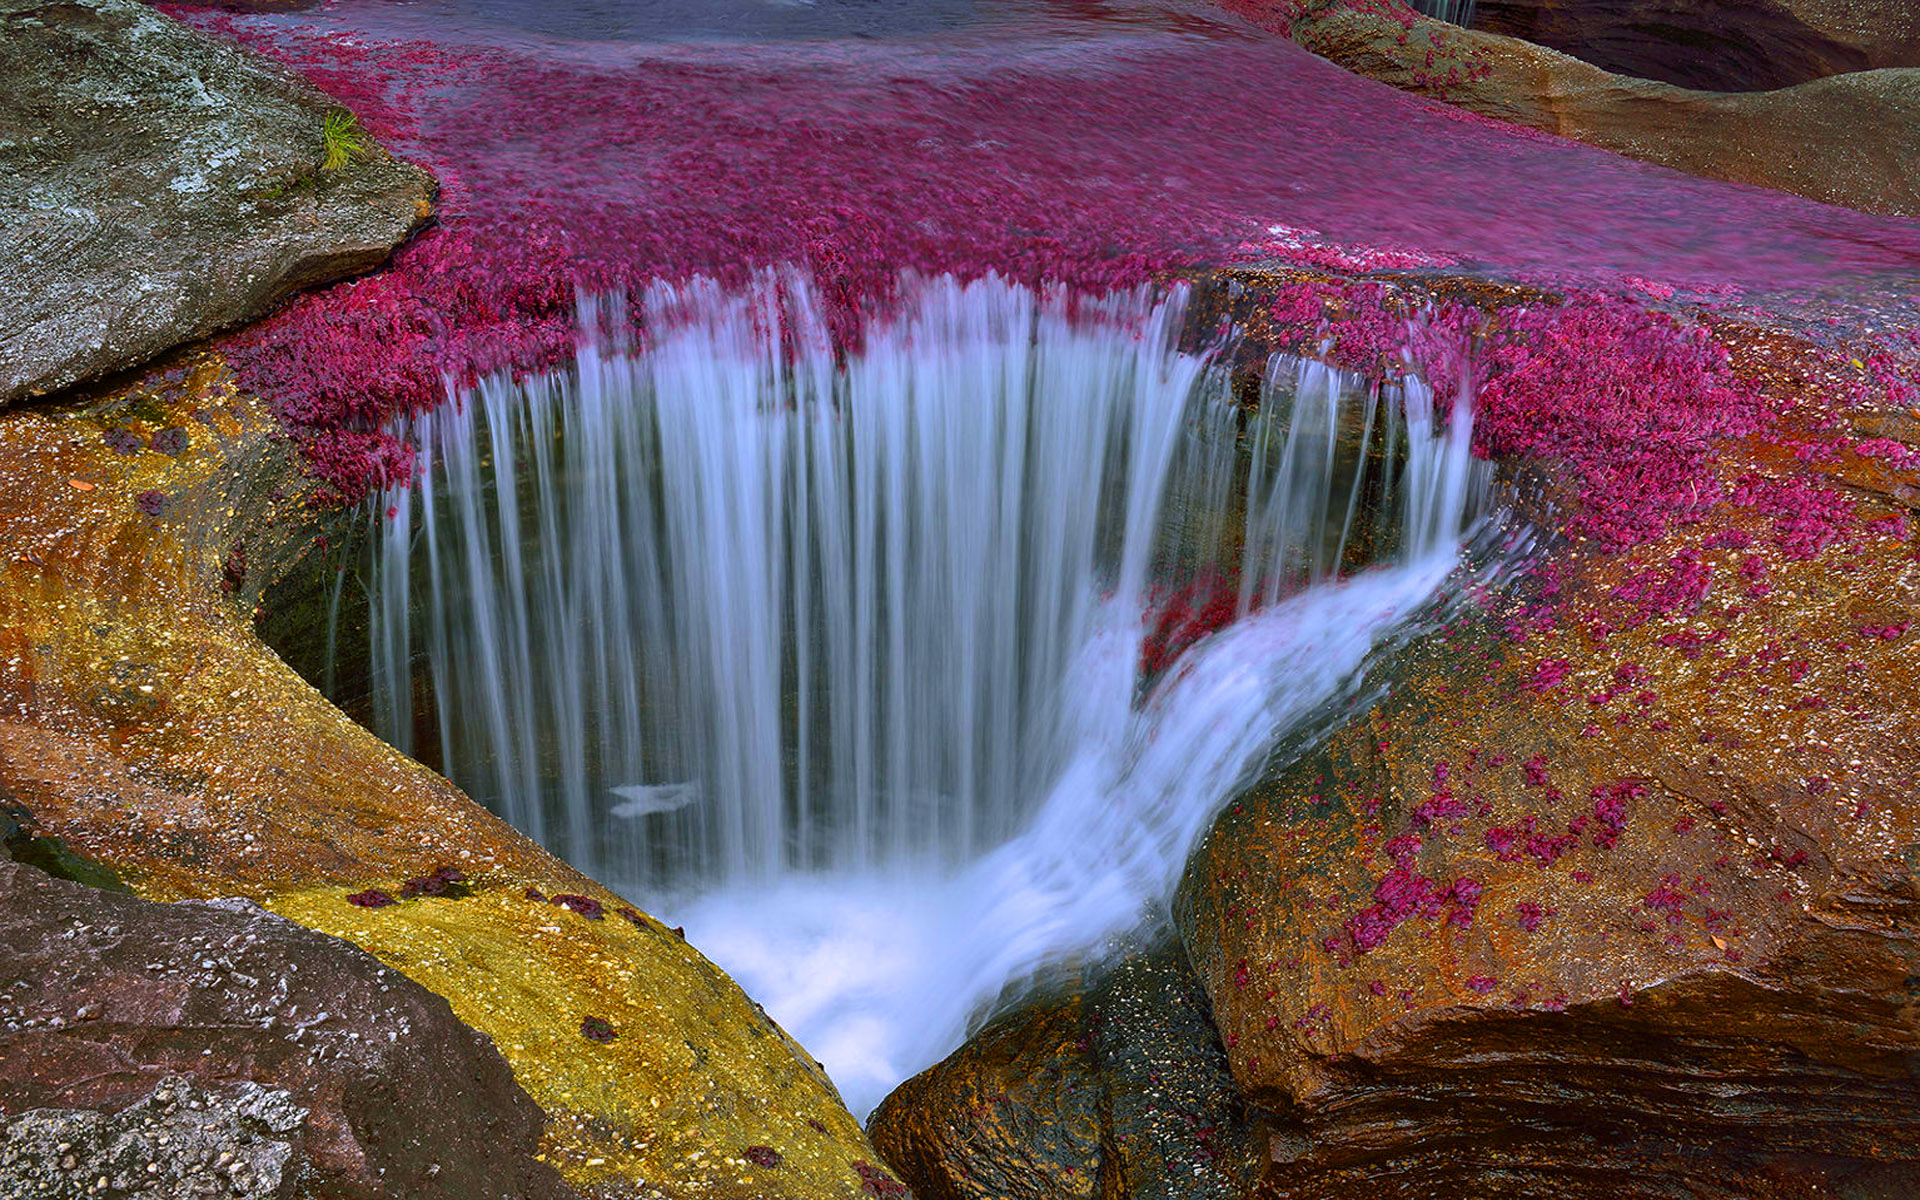 Cano Cristales River In Colombia An Amazingly Beautiful River